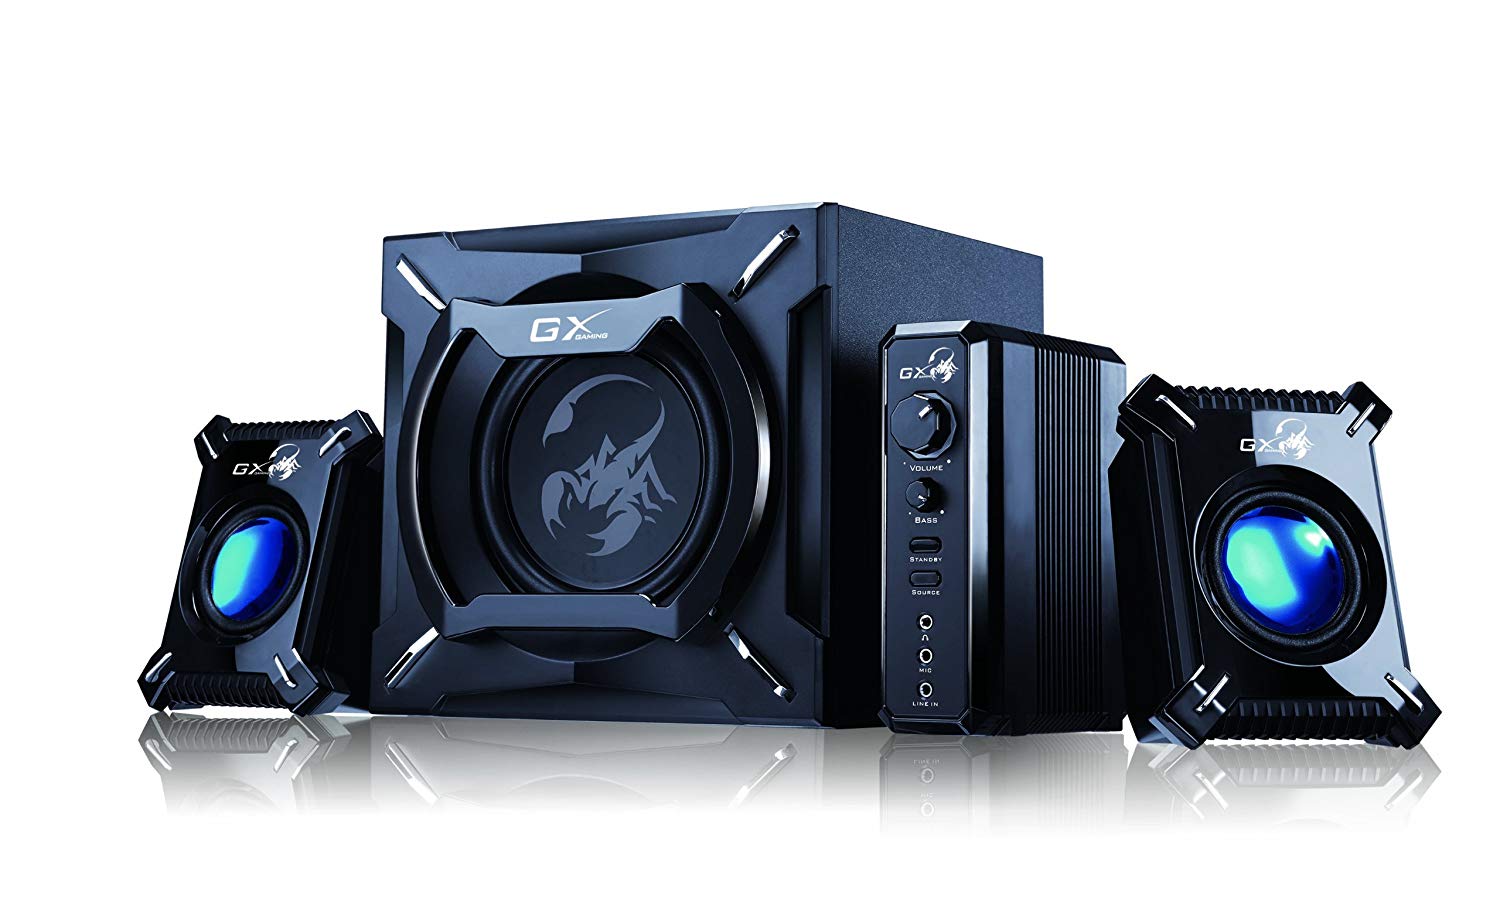 Gaming Speaker: Genius SW-G2.1 2000 2.1 Channel 45 Watts RMS Gaming Woofer Speaker System for Android, Apple Devices, Tablets, Laptops, PC